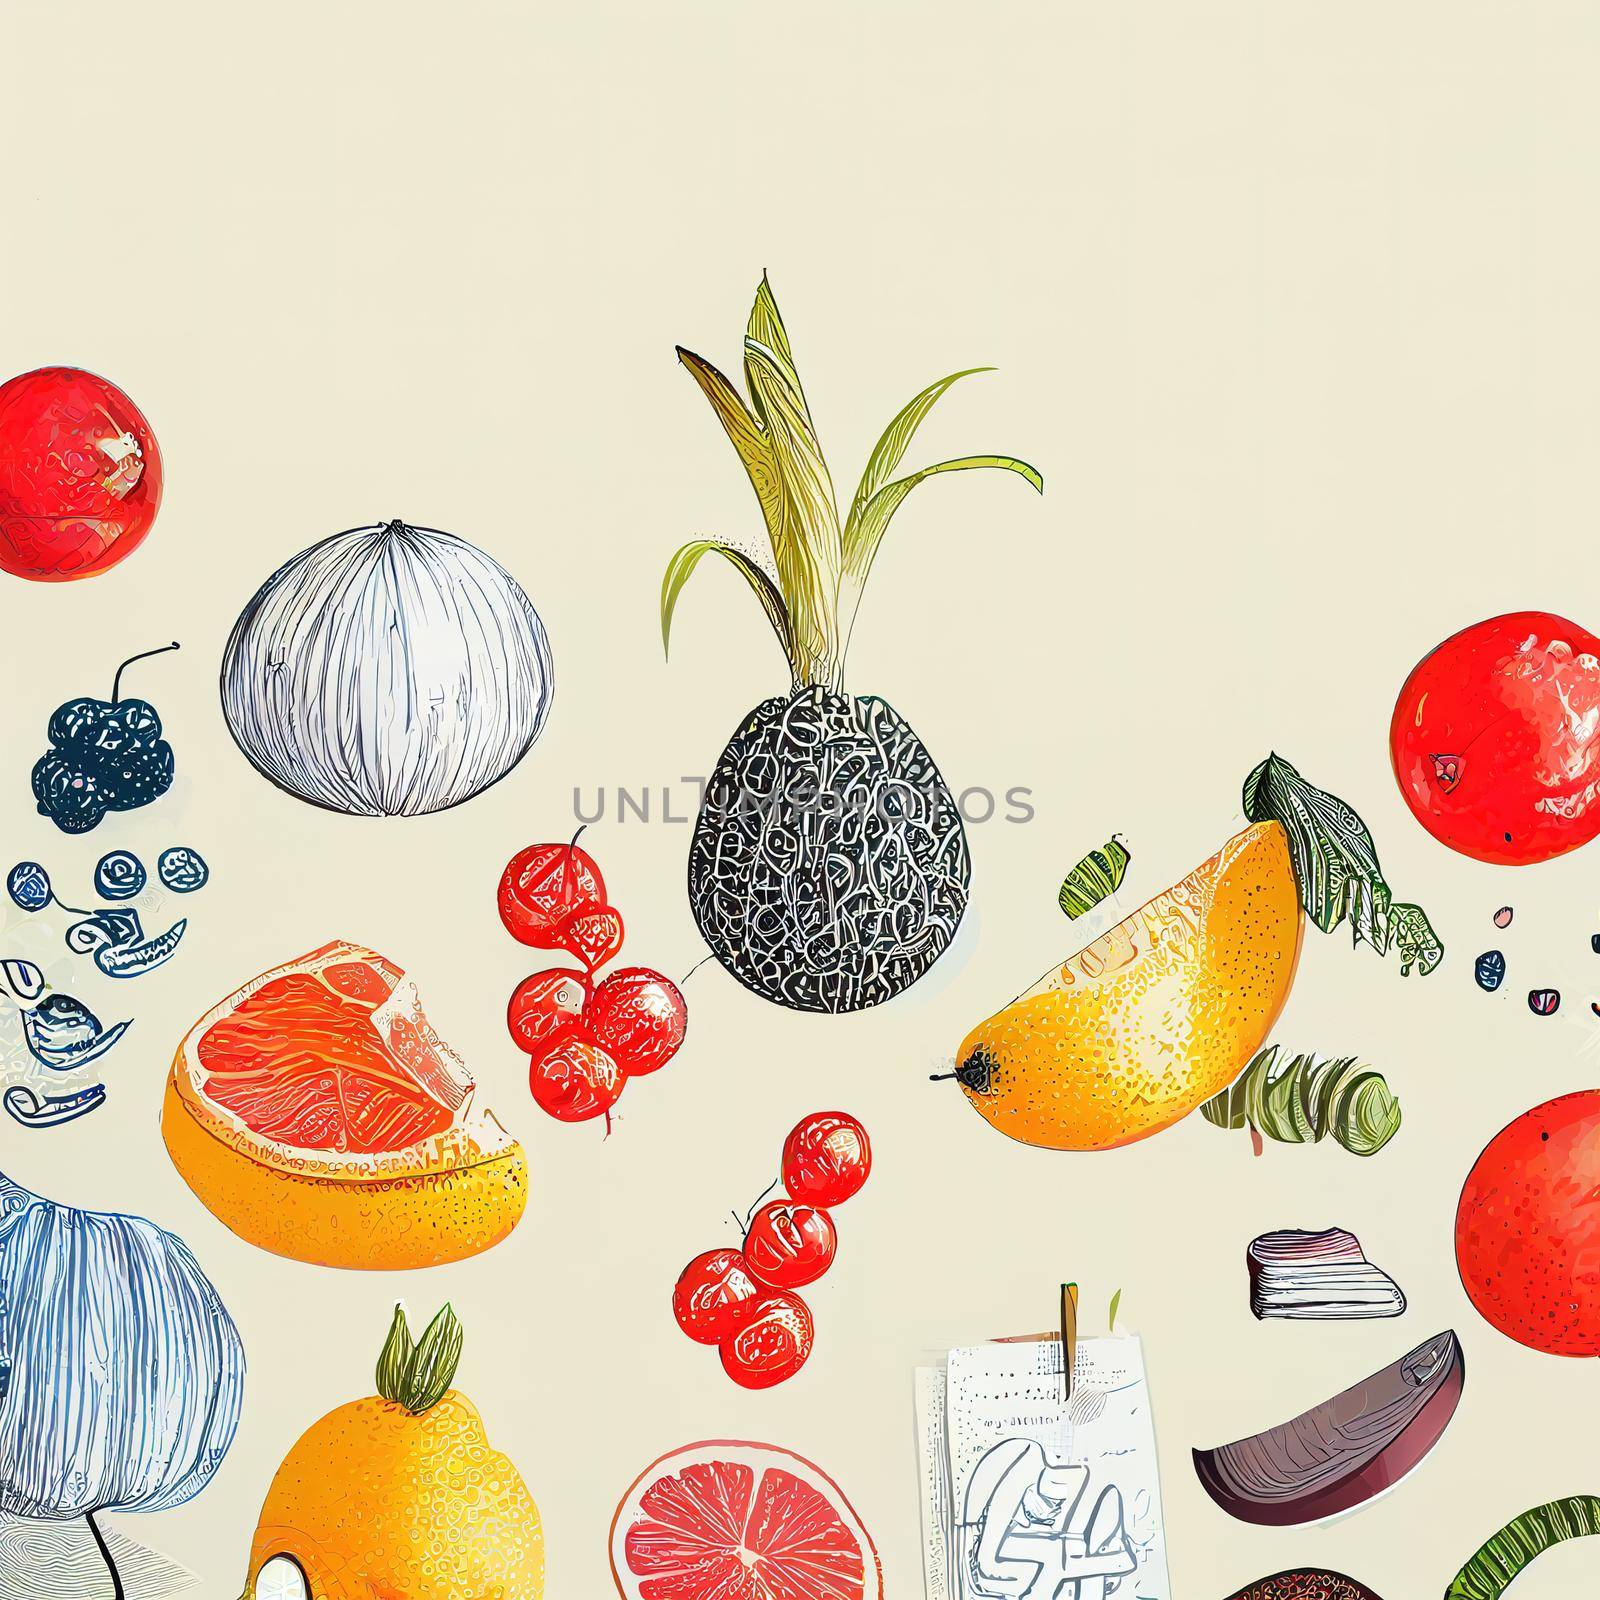 Fresh stylish illustration with abstract elements, doodles and fruits by 2ragon